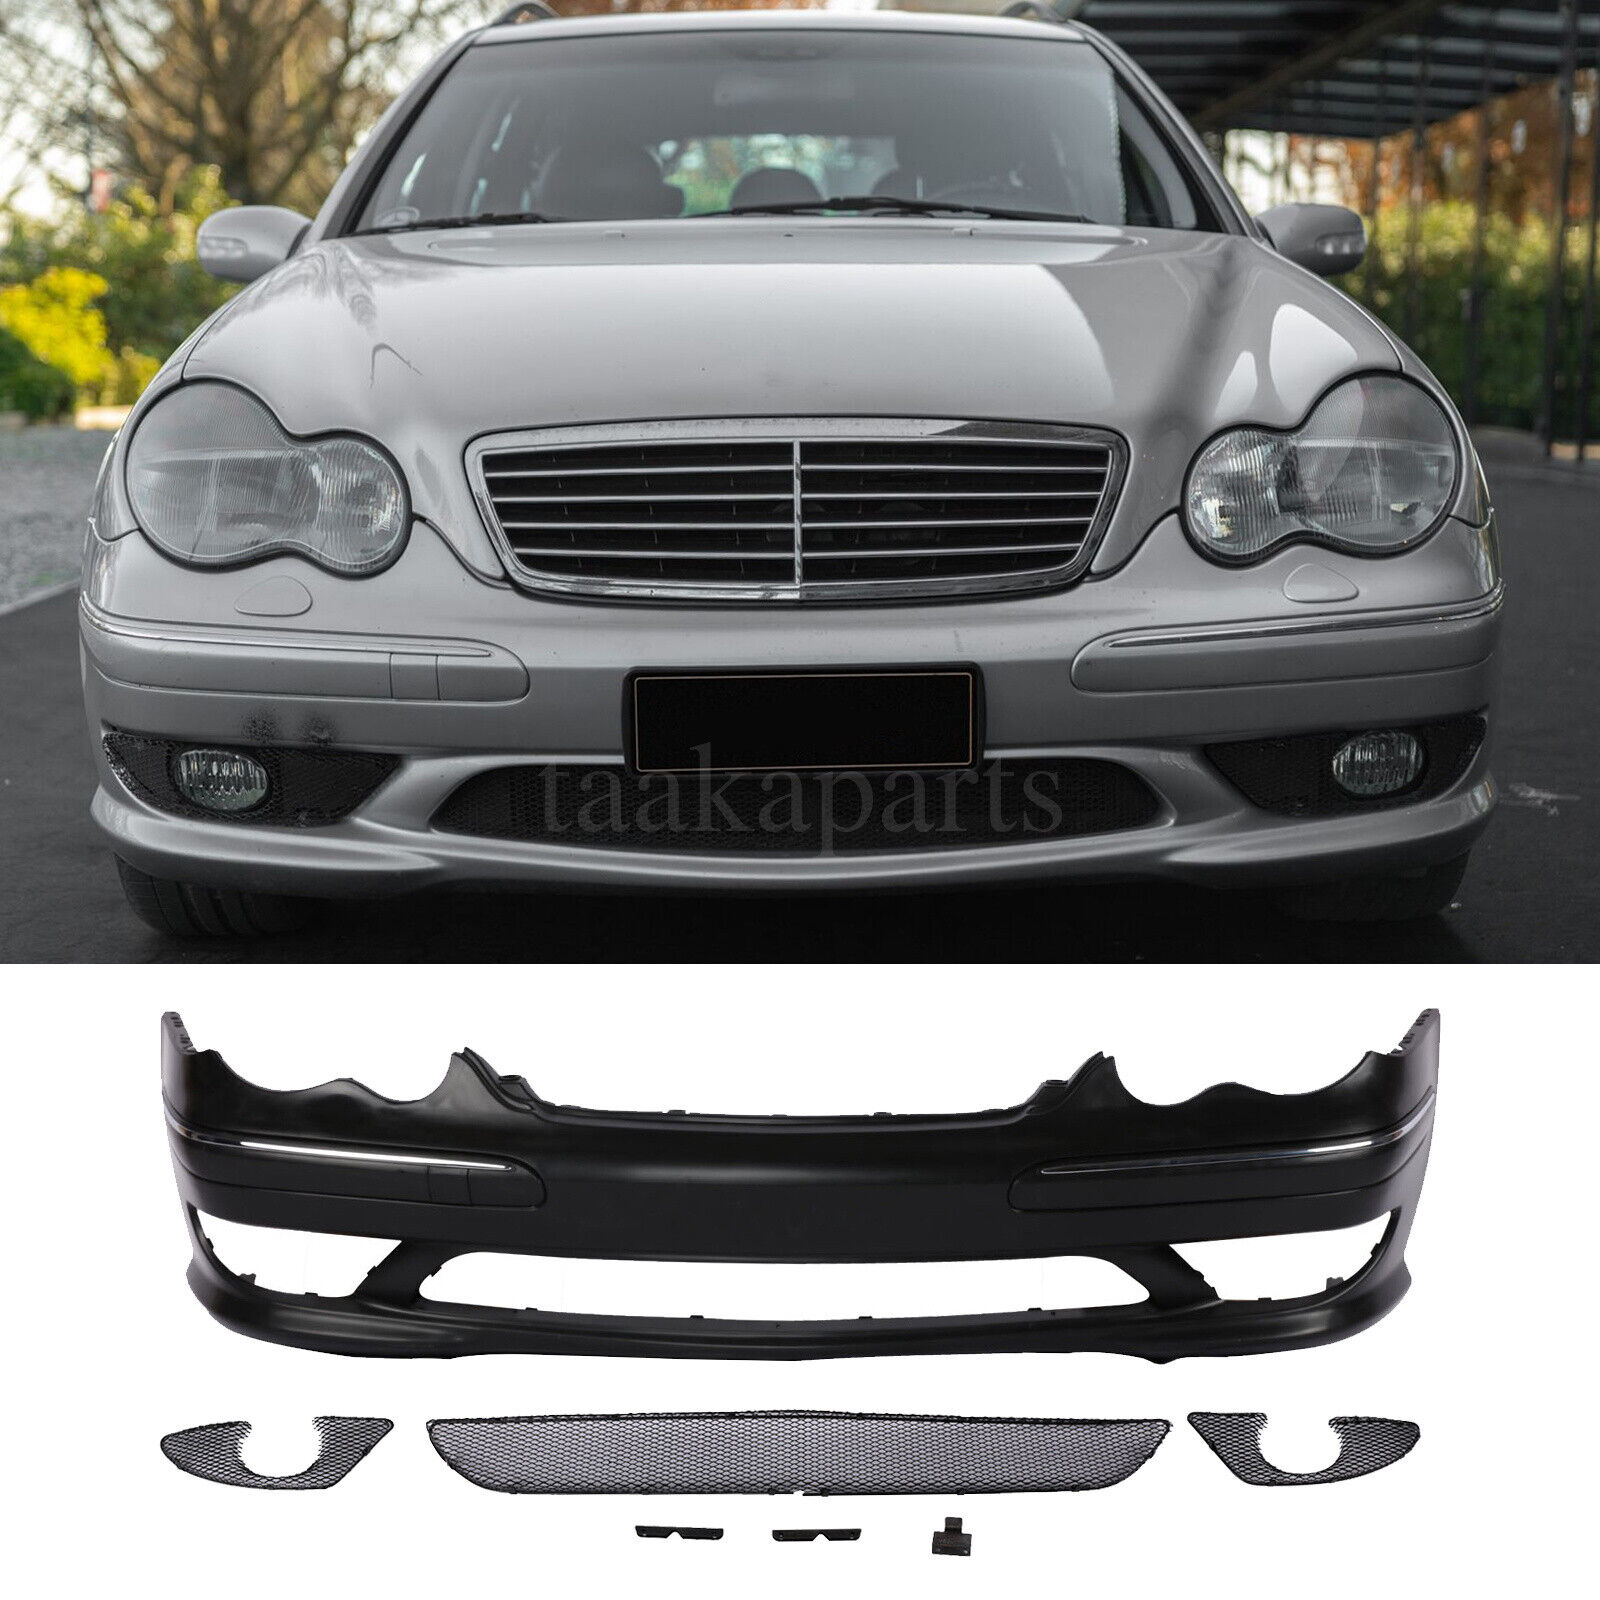 AMG Style Front Bumper Cover W/ Aluminium Lower Grille for Benz W203 2001-2007